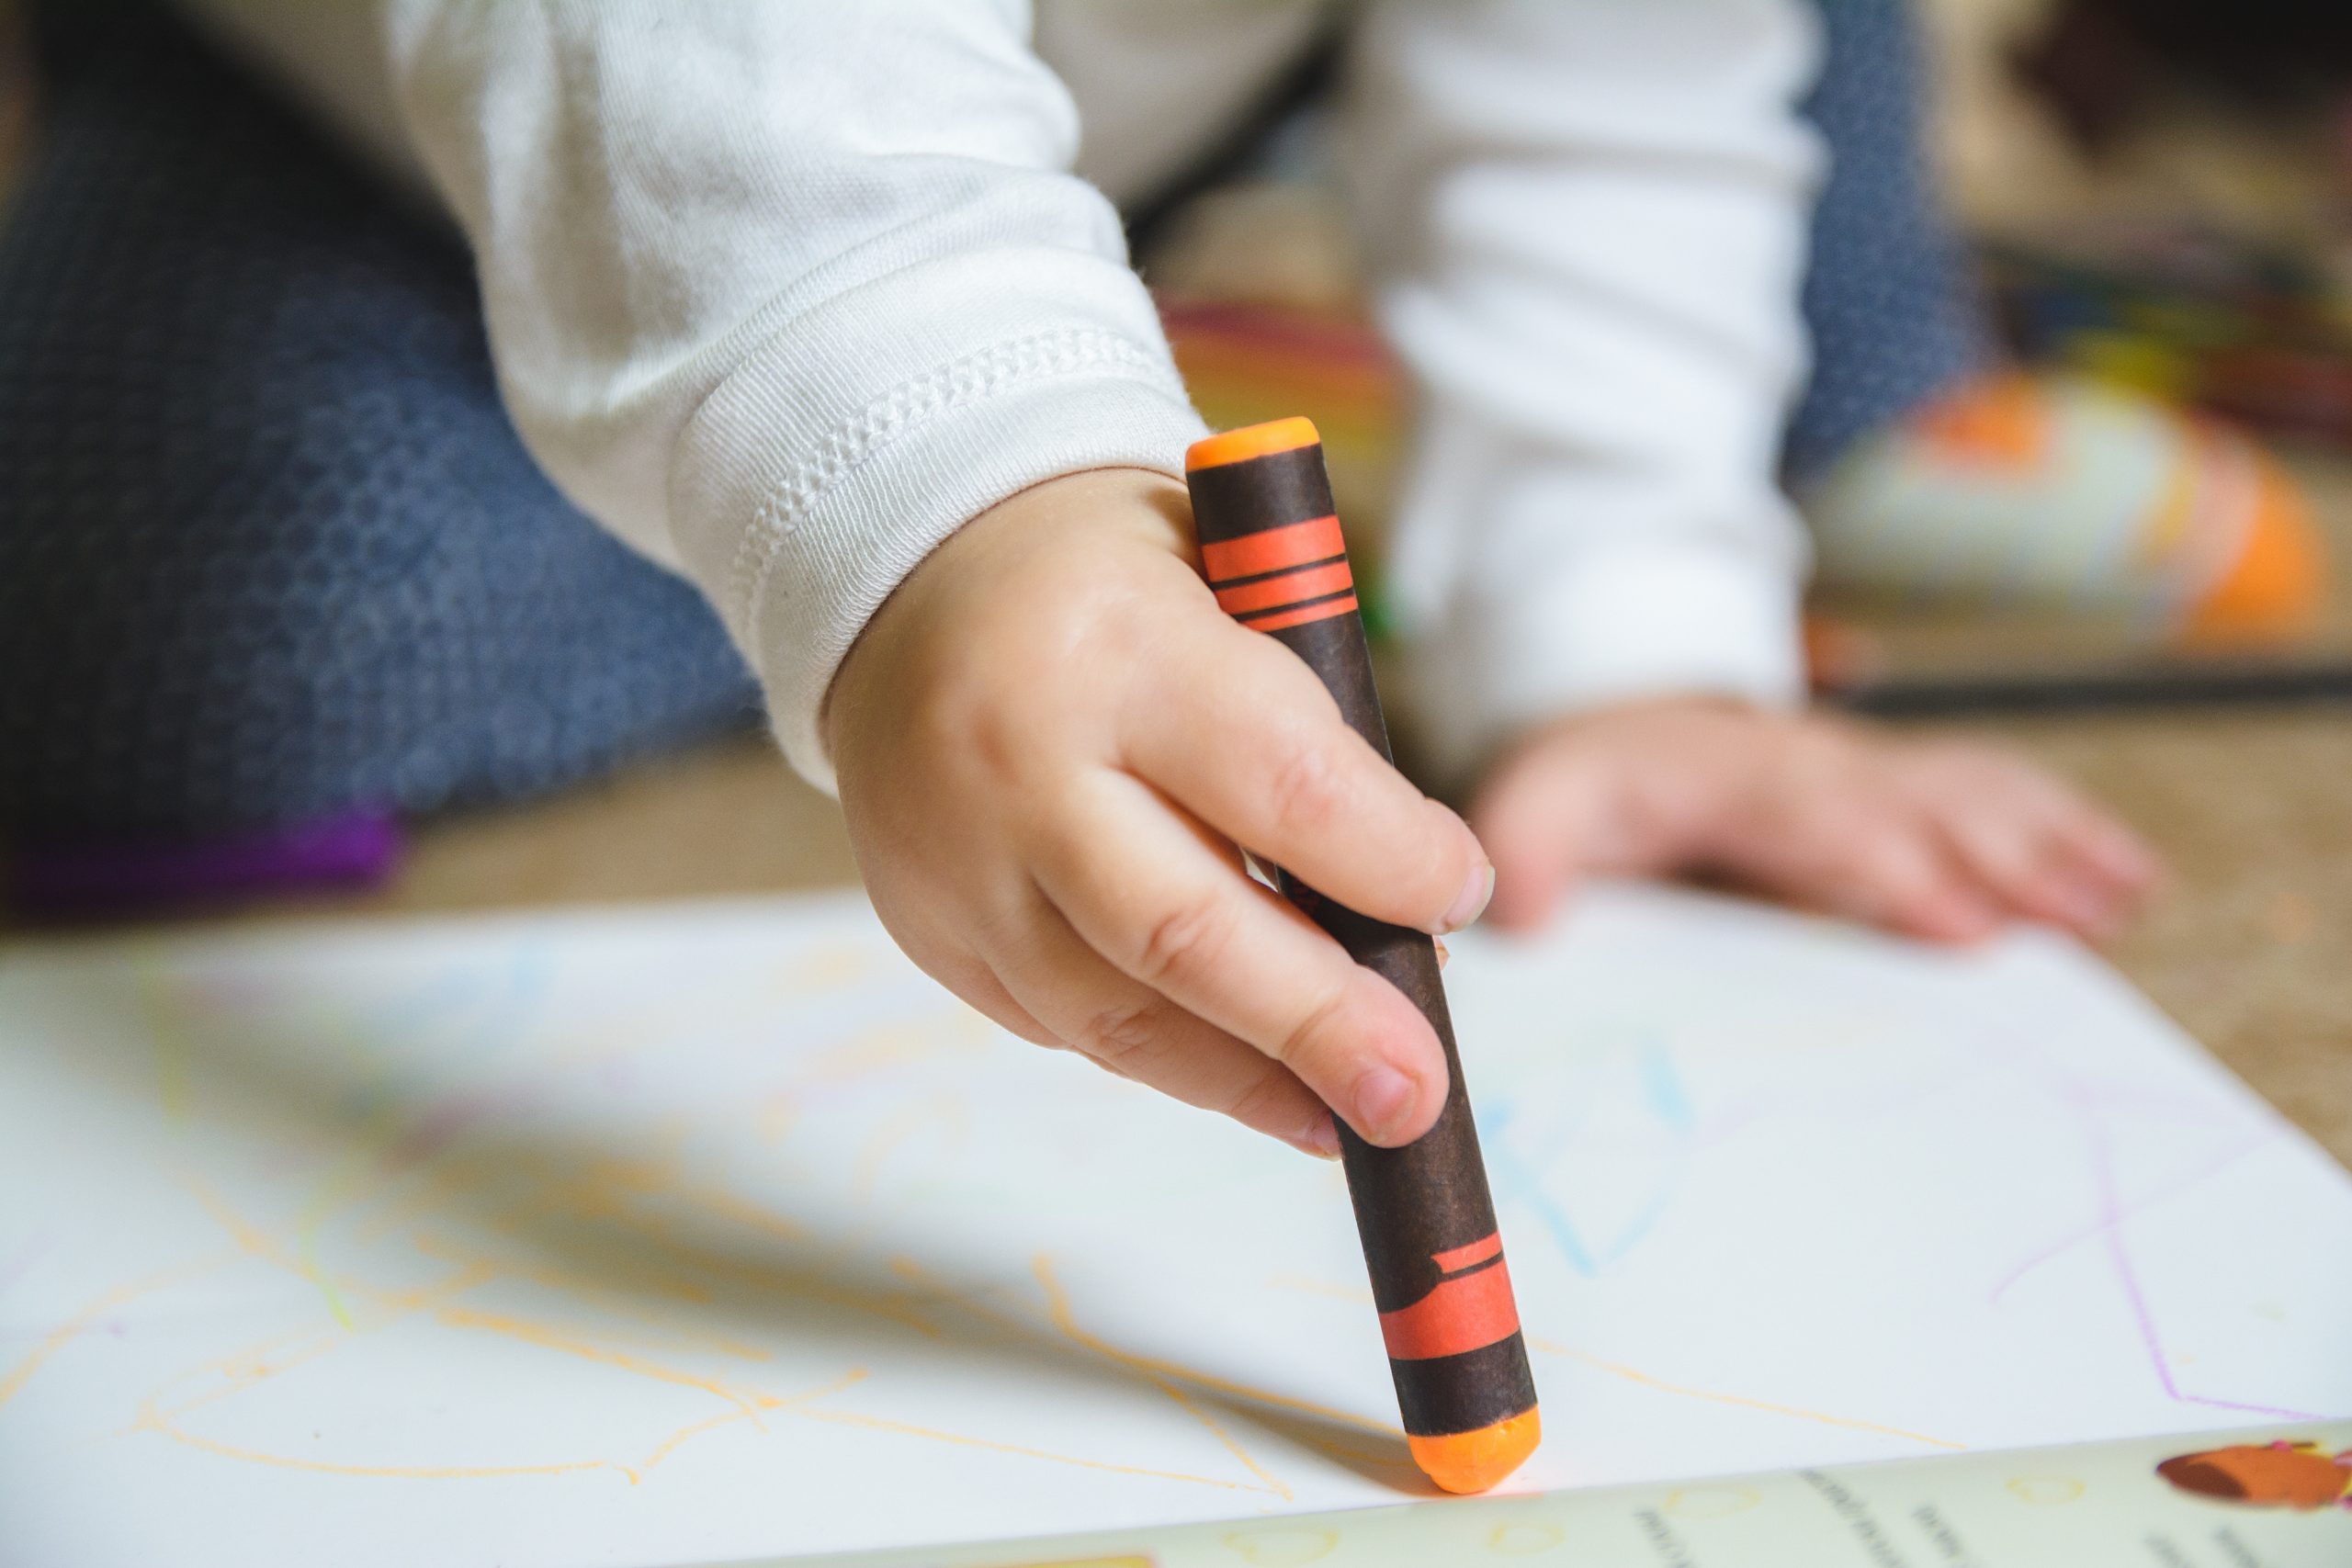 A baby drawing with an orange crayon on the paper